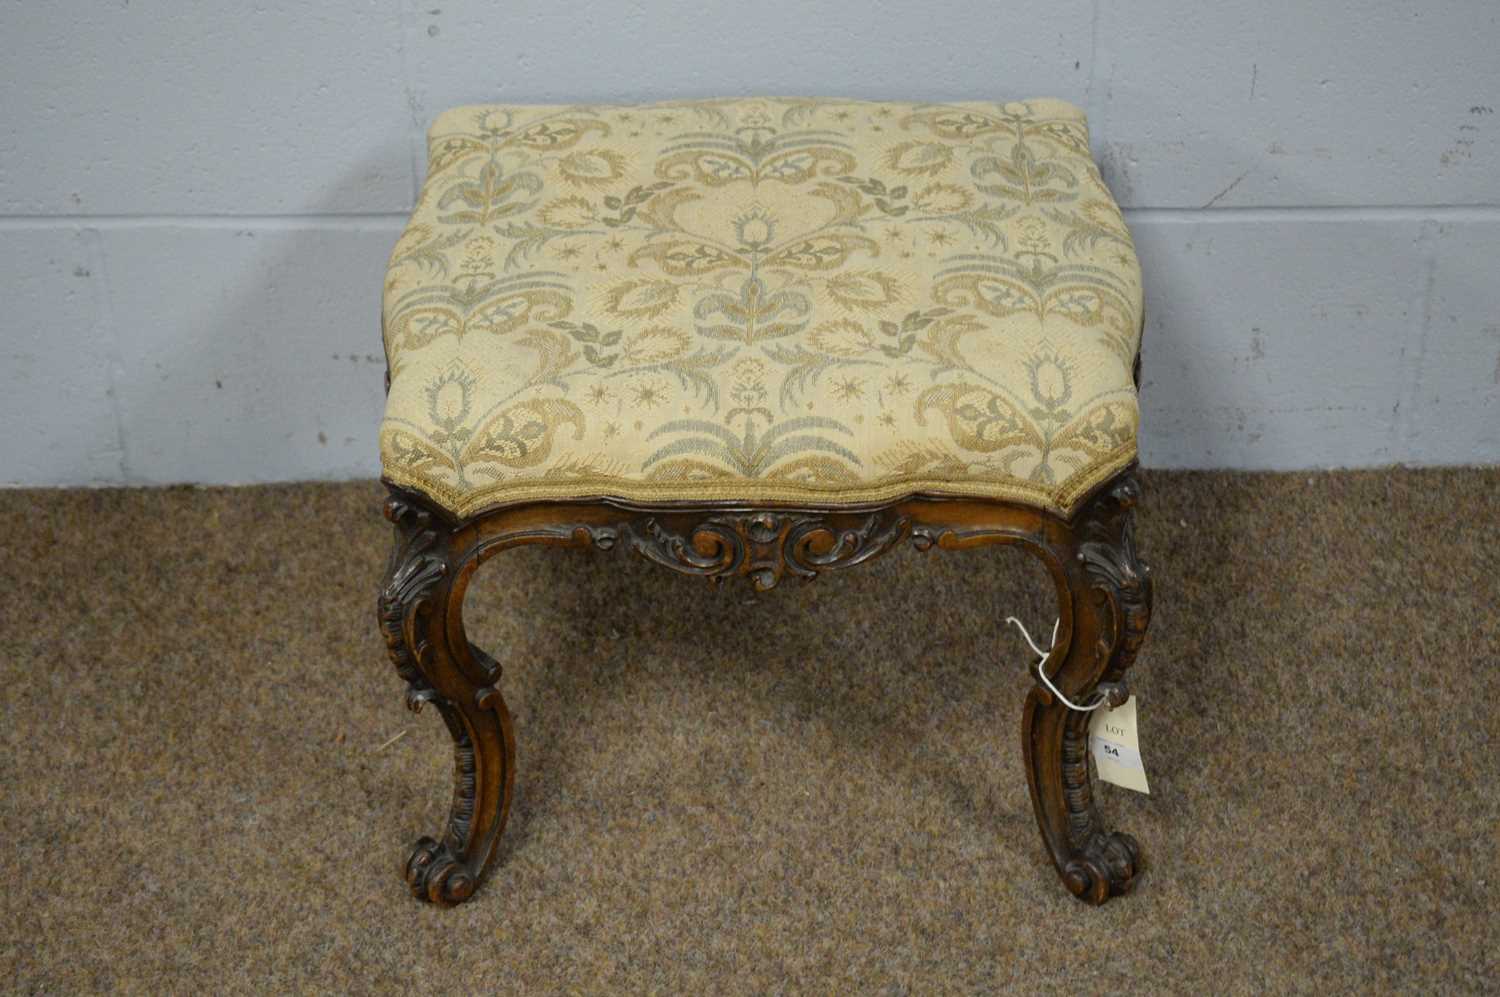 An ornate Victorian carved walnut footstool